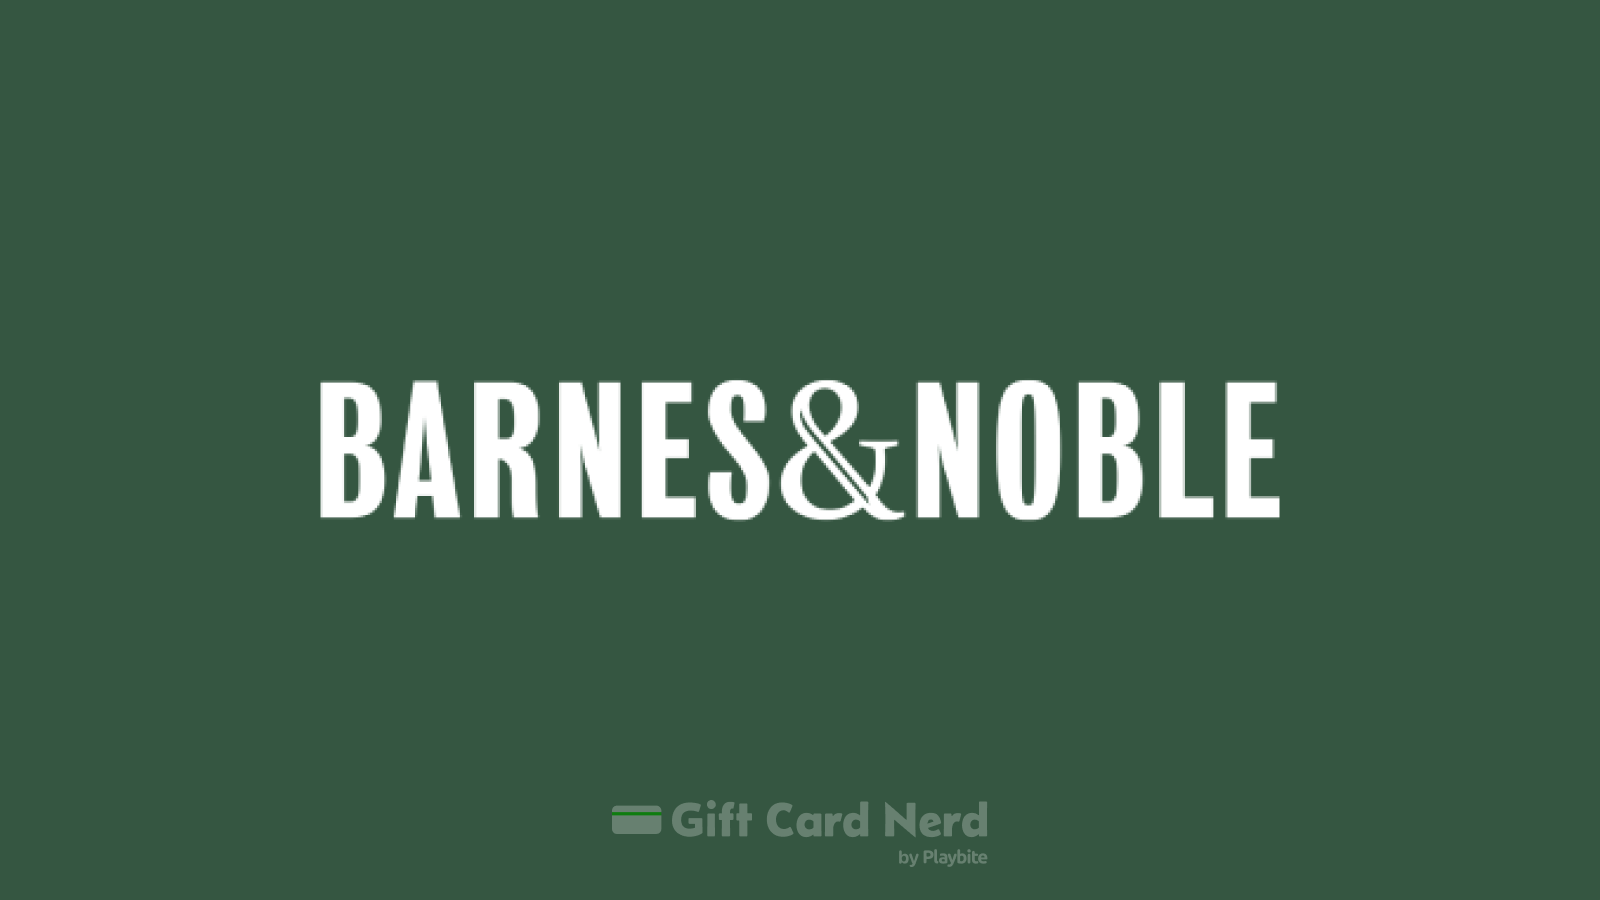 Does Walgreens Sell Barnes and Noble Gift Cards?